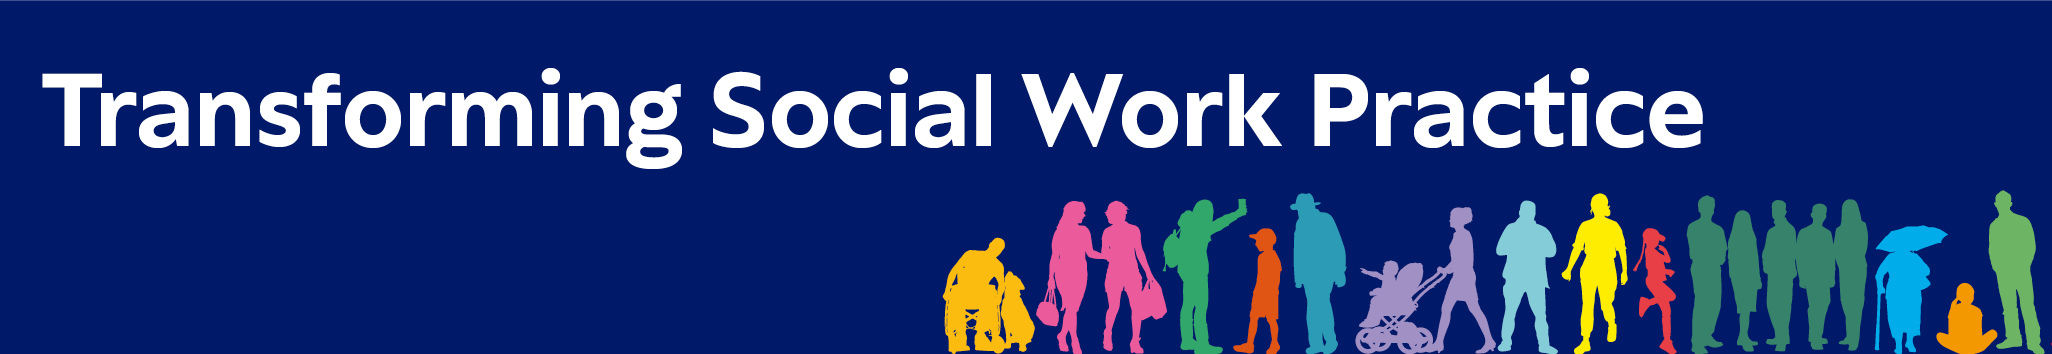 Navy blue banner with colourful silhouettes. Text: "transforming social work practice"